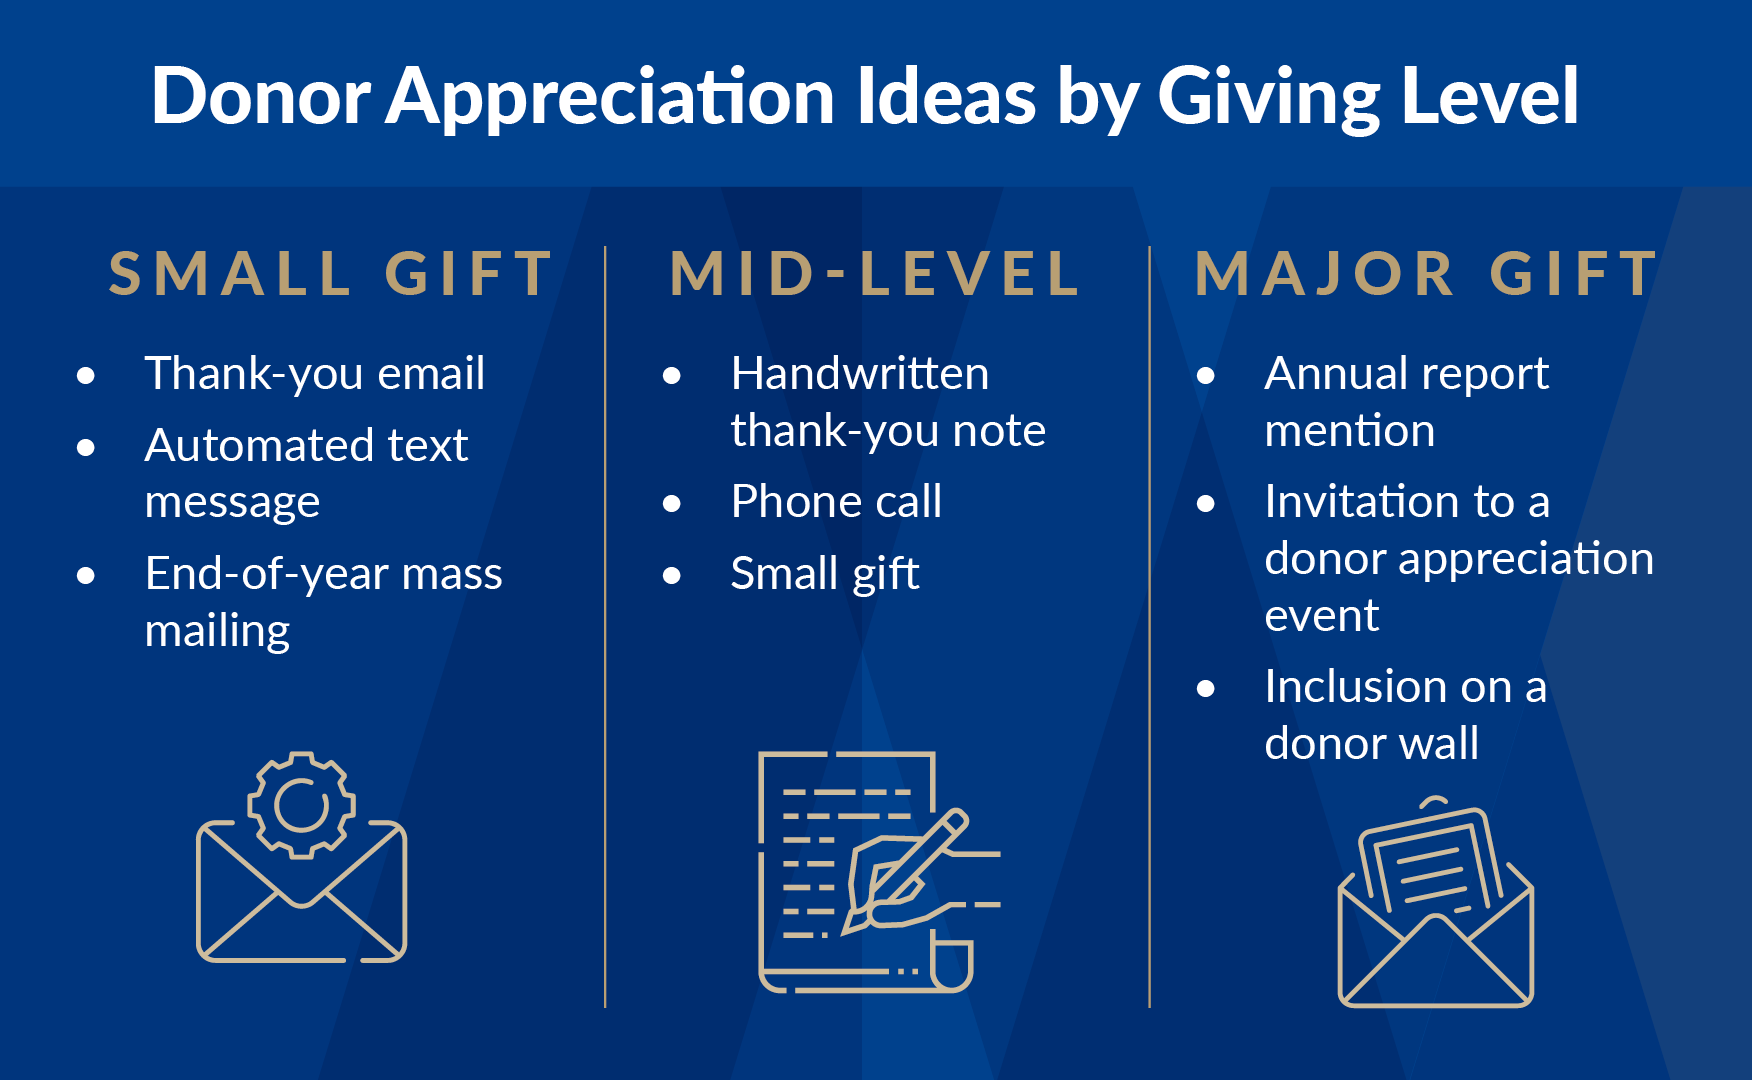 A list of appreciation ideas for donor stewardship organized by gift size.